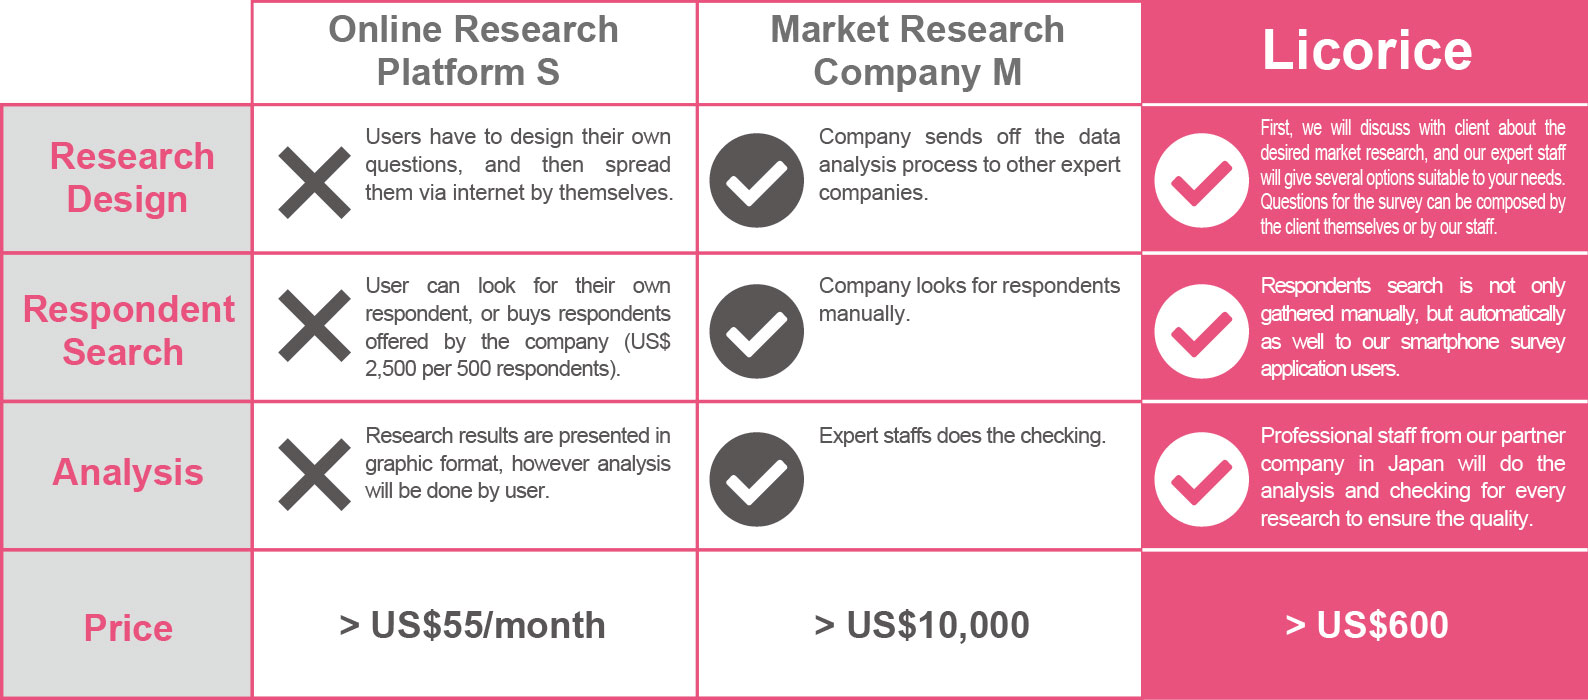 Online Research Platform S Market Research Company M LICORICE Research Flow User decides their own questions, and then spready it via internet (WEB). Company sends off the data analysis process to other expert companies. First, we will discuss with client about the desired market research, and our expert staff will give several options suitable to your needs. Questions for the survey can be composed by the client themselves or by our staff.Respondent SearchUser can look for their own respondent, or buys respondents offered by the company (Rp 25.000.000 per 500 respondents).Company looks for respondents manually.Respondents search is not only gathered manually, but automatically as well to our smartphone survey application users.AnalysisResearch results are presented in graphic format, however analysis will be done by user.Expert staffs does the checking.Professional staff from our partner company in Japan will do the analysis and checking for every research to ensure the quality.PriceRp550.000/monthRp100.000.000~Rp6.000.000~